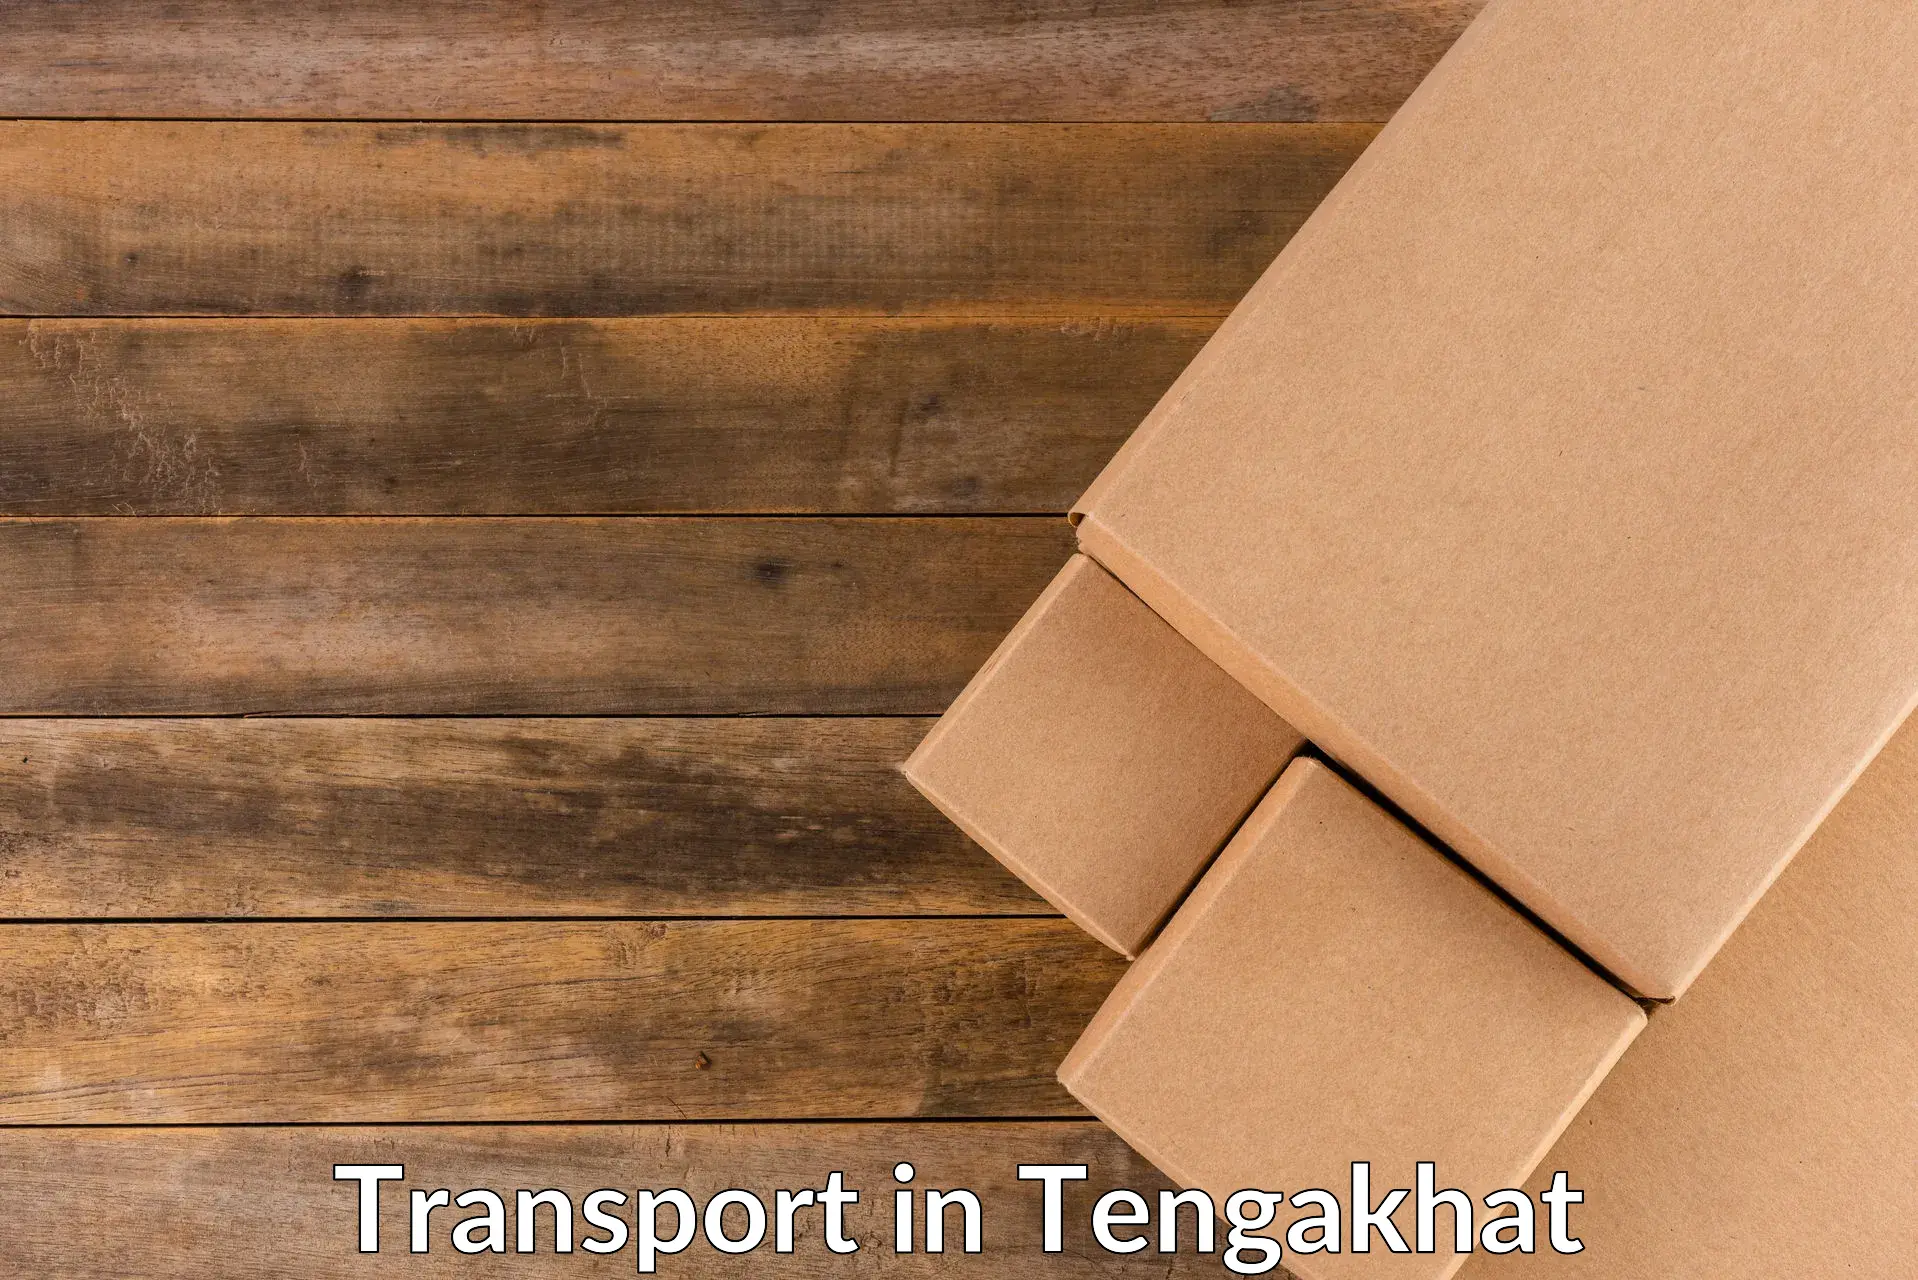 Container transportation services in Tengakhat